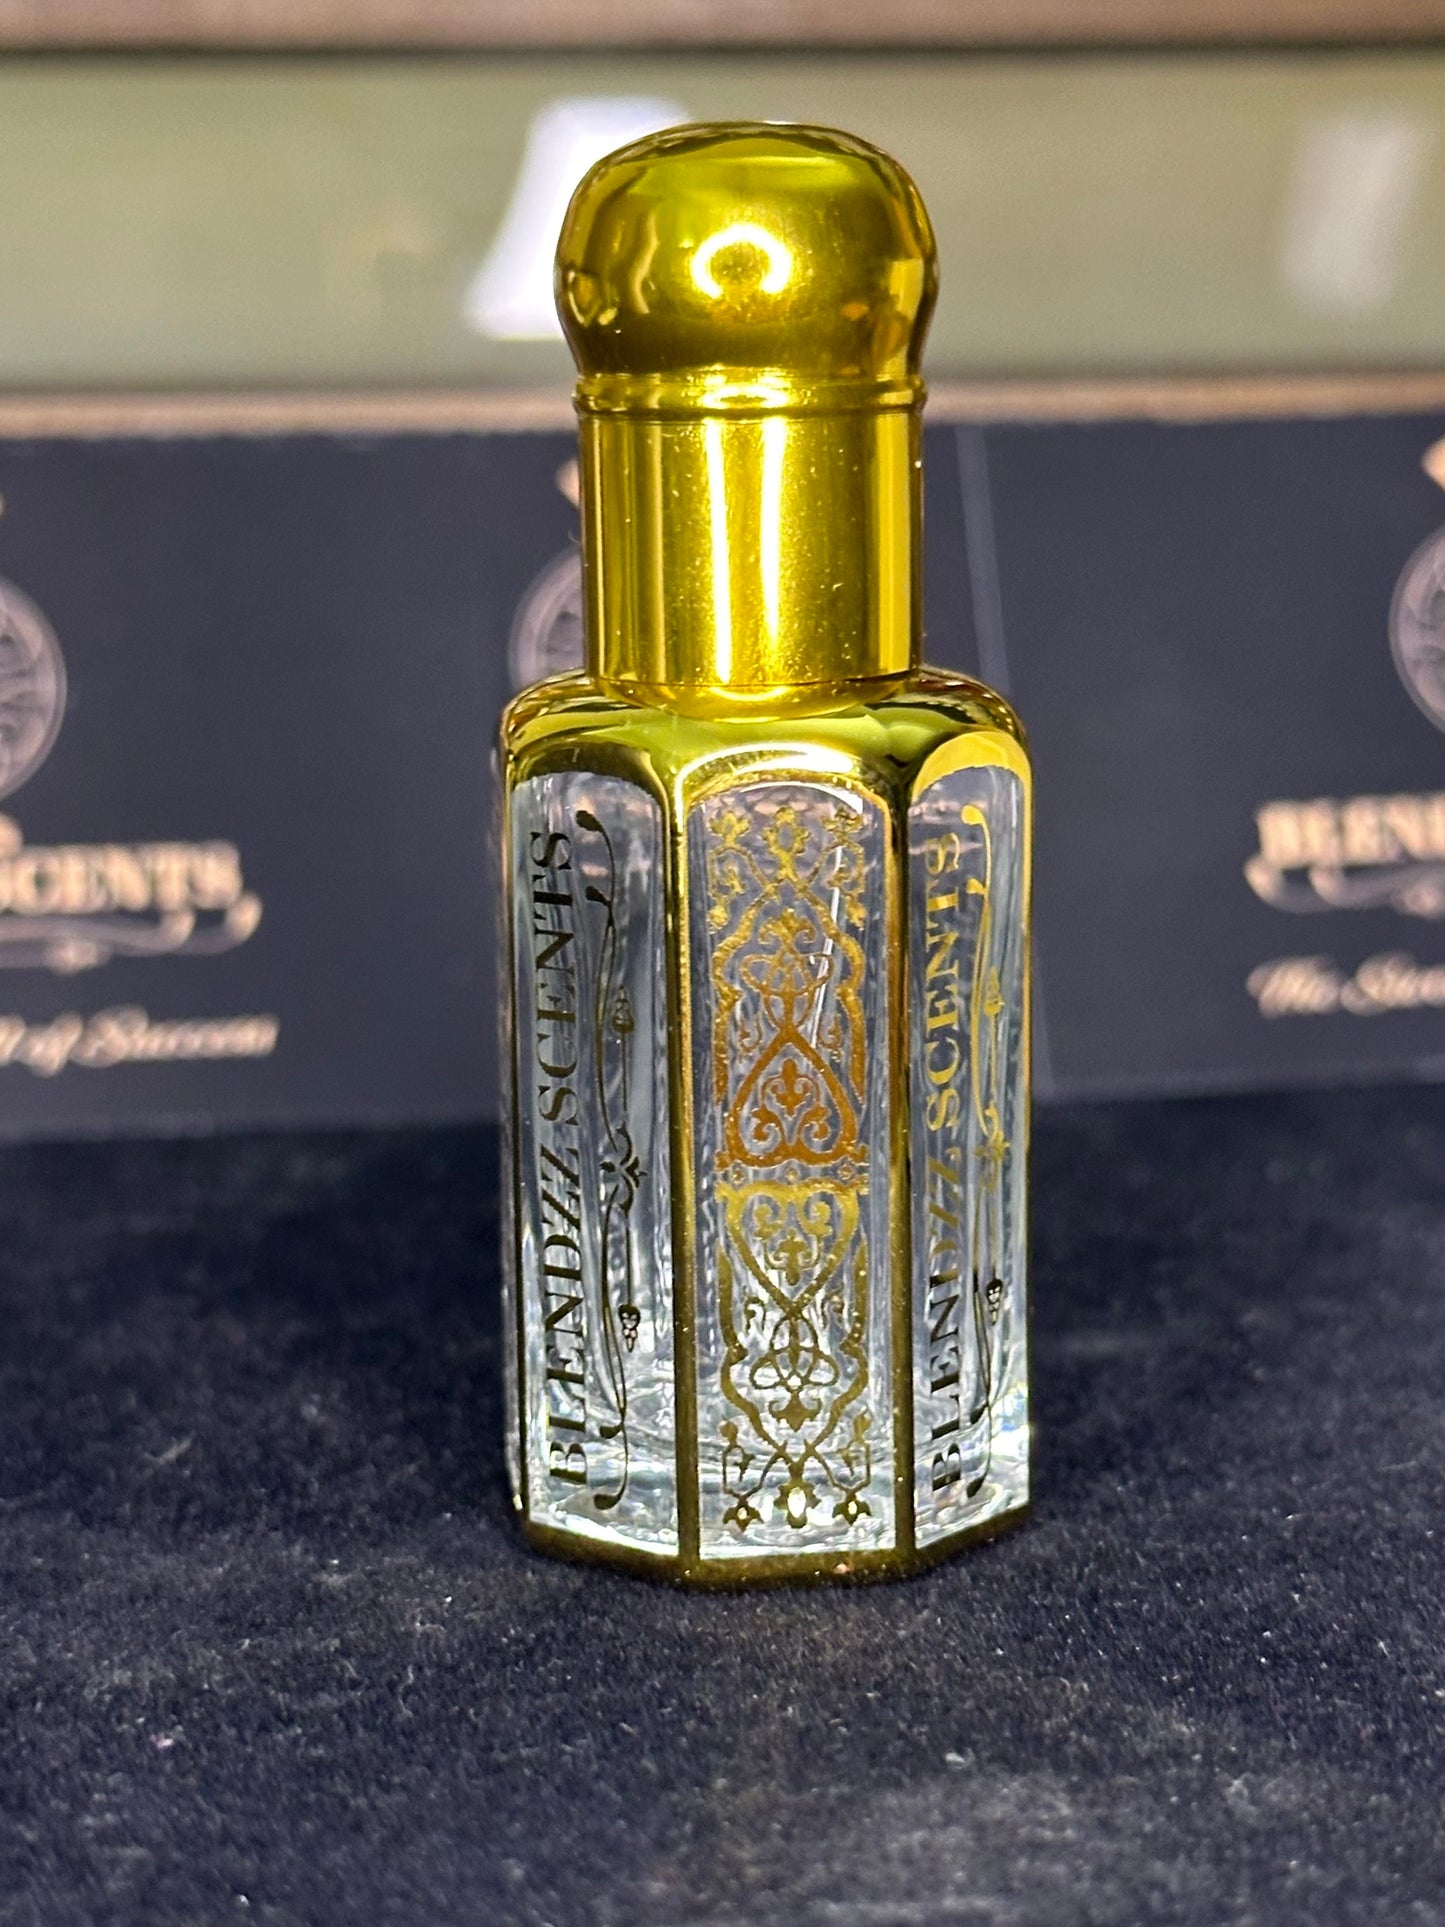 So we added Cambodian Oud into our ombre nomade inspired perfume oil a